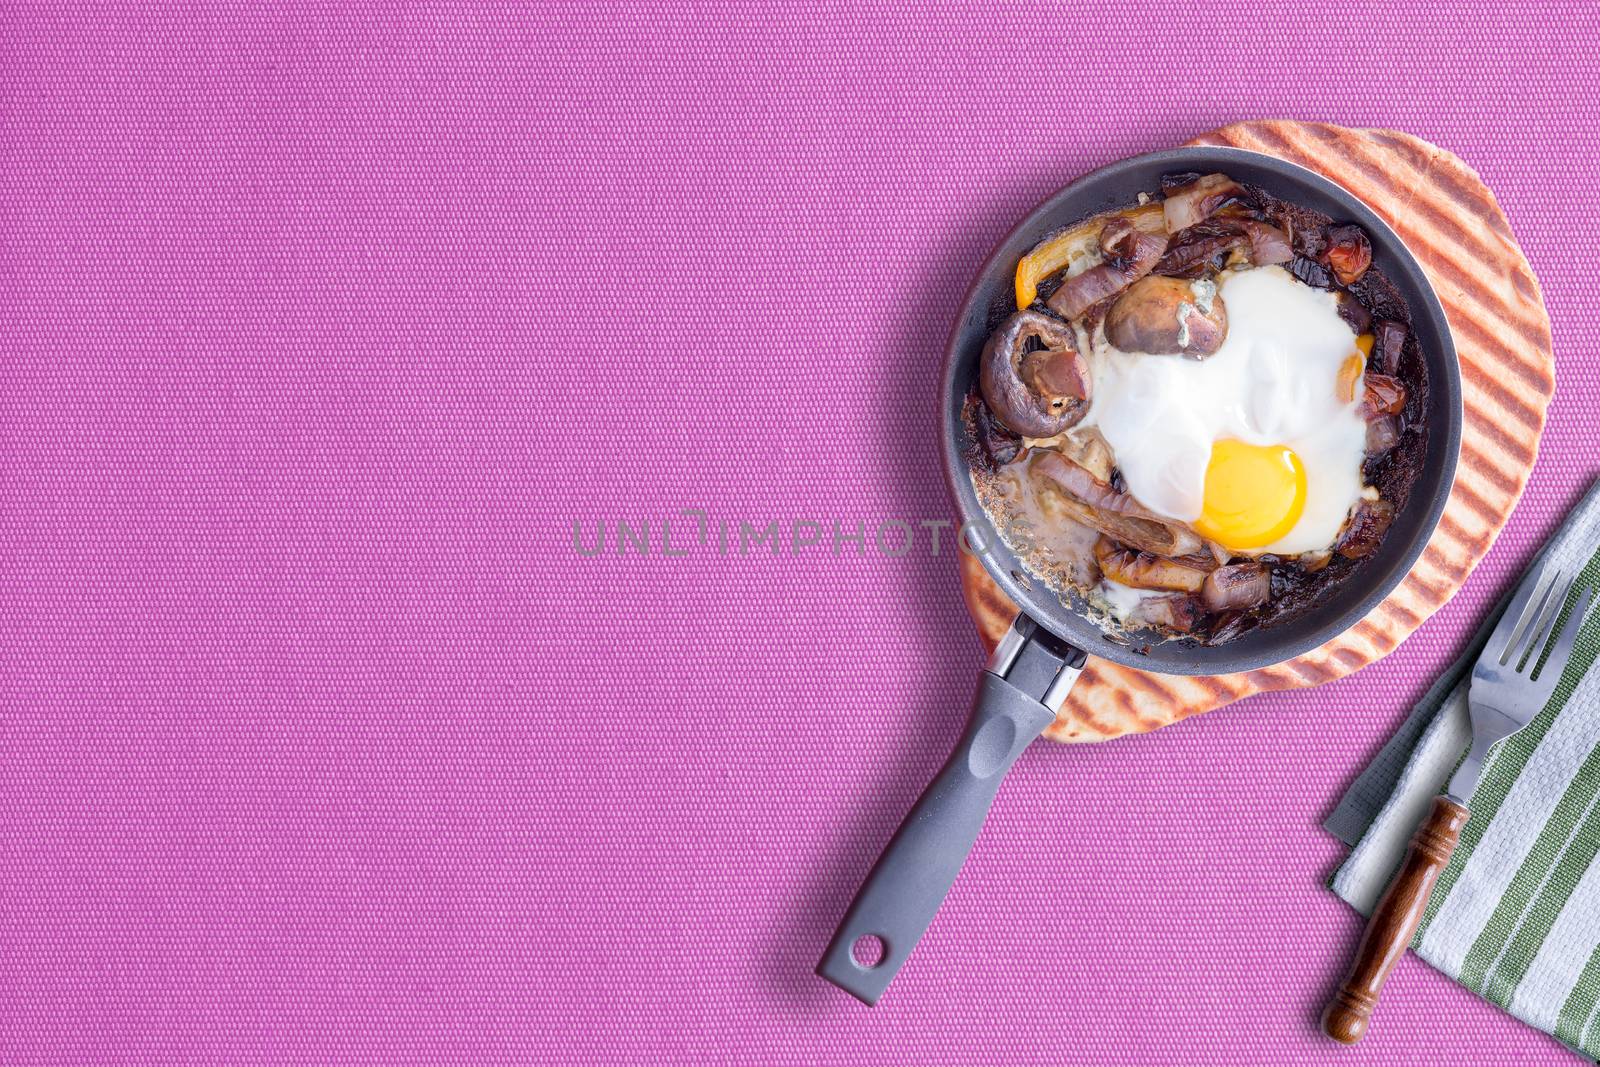 Sunny Side up Omelette on Violet Color Table Cloth, Copy Space at Left